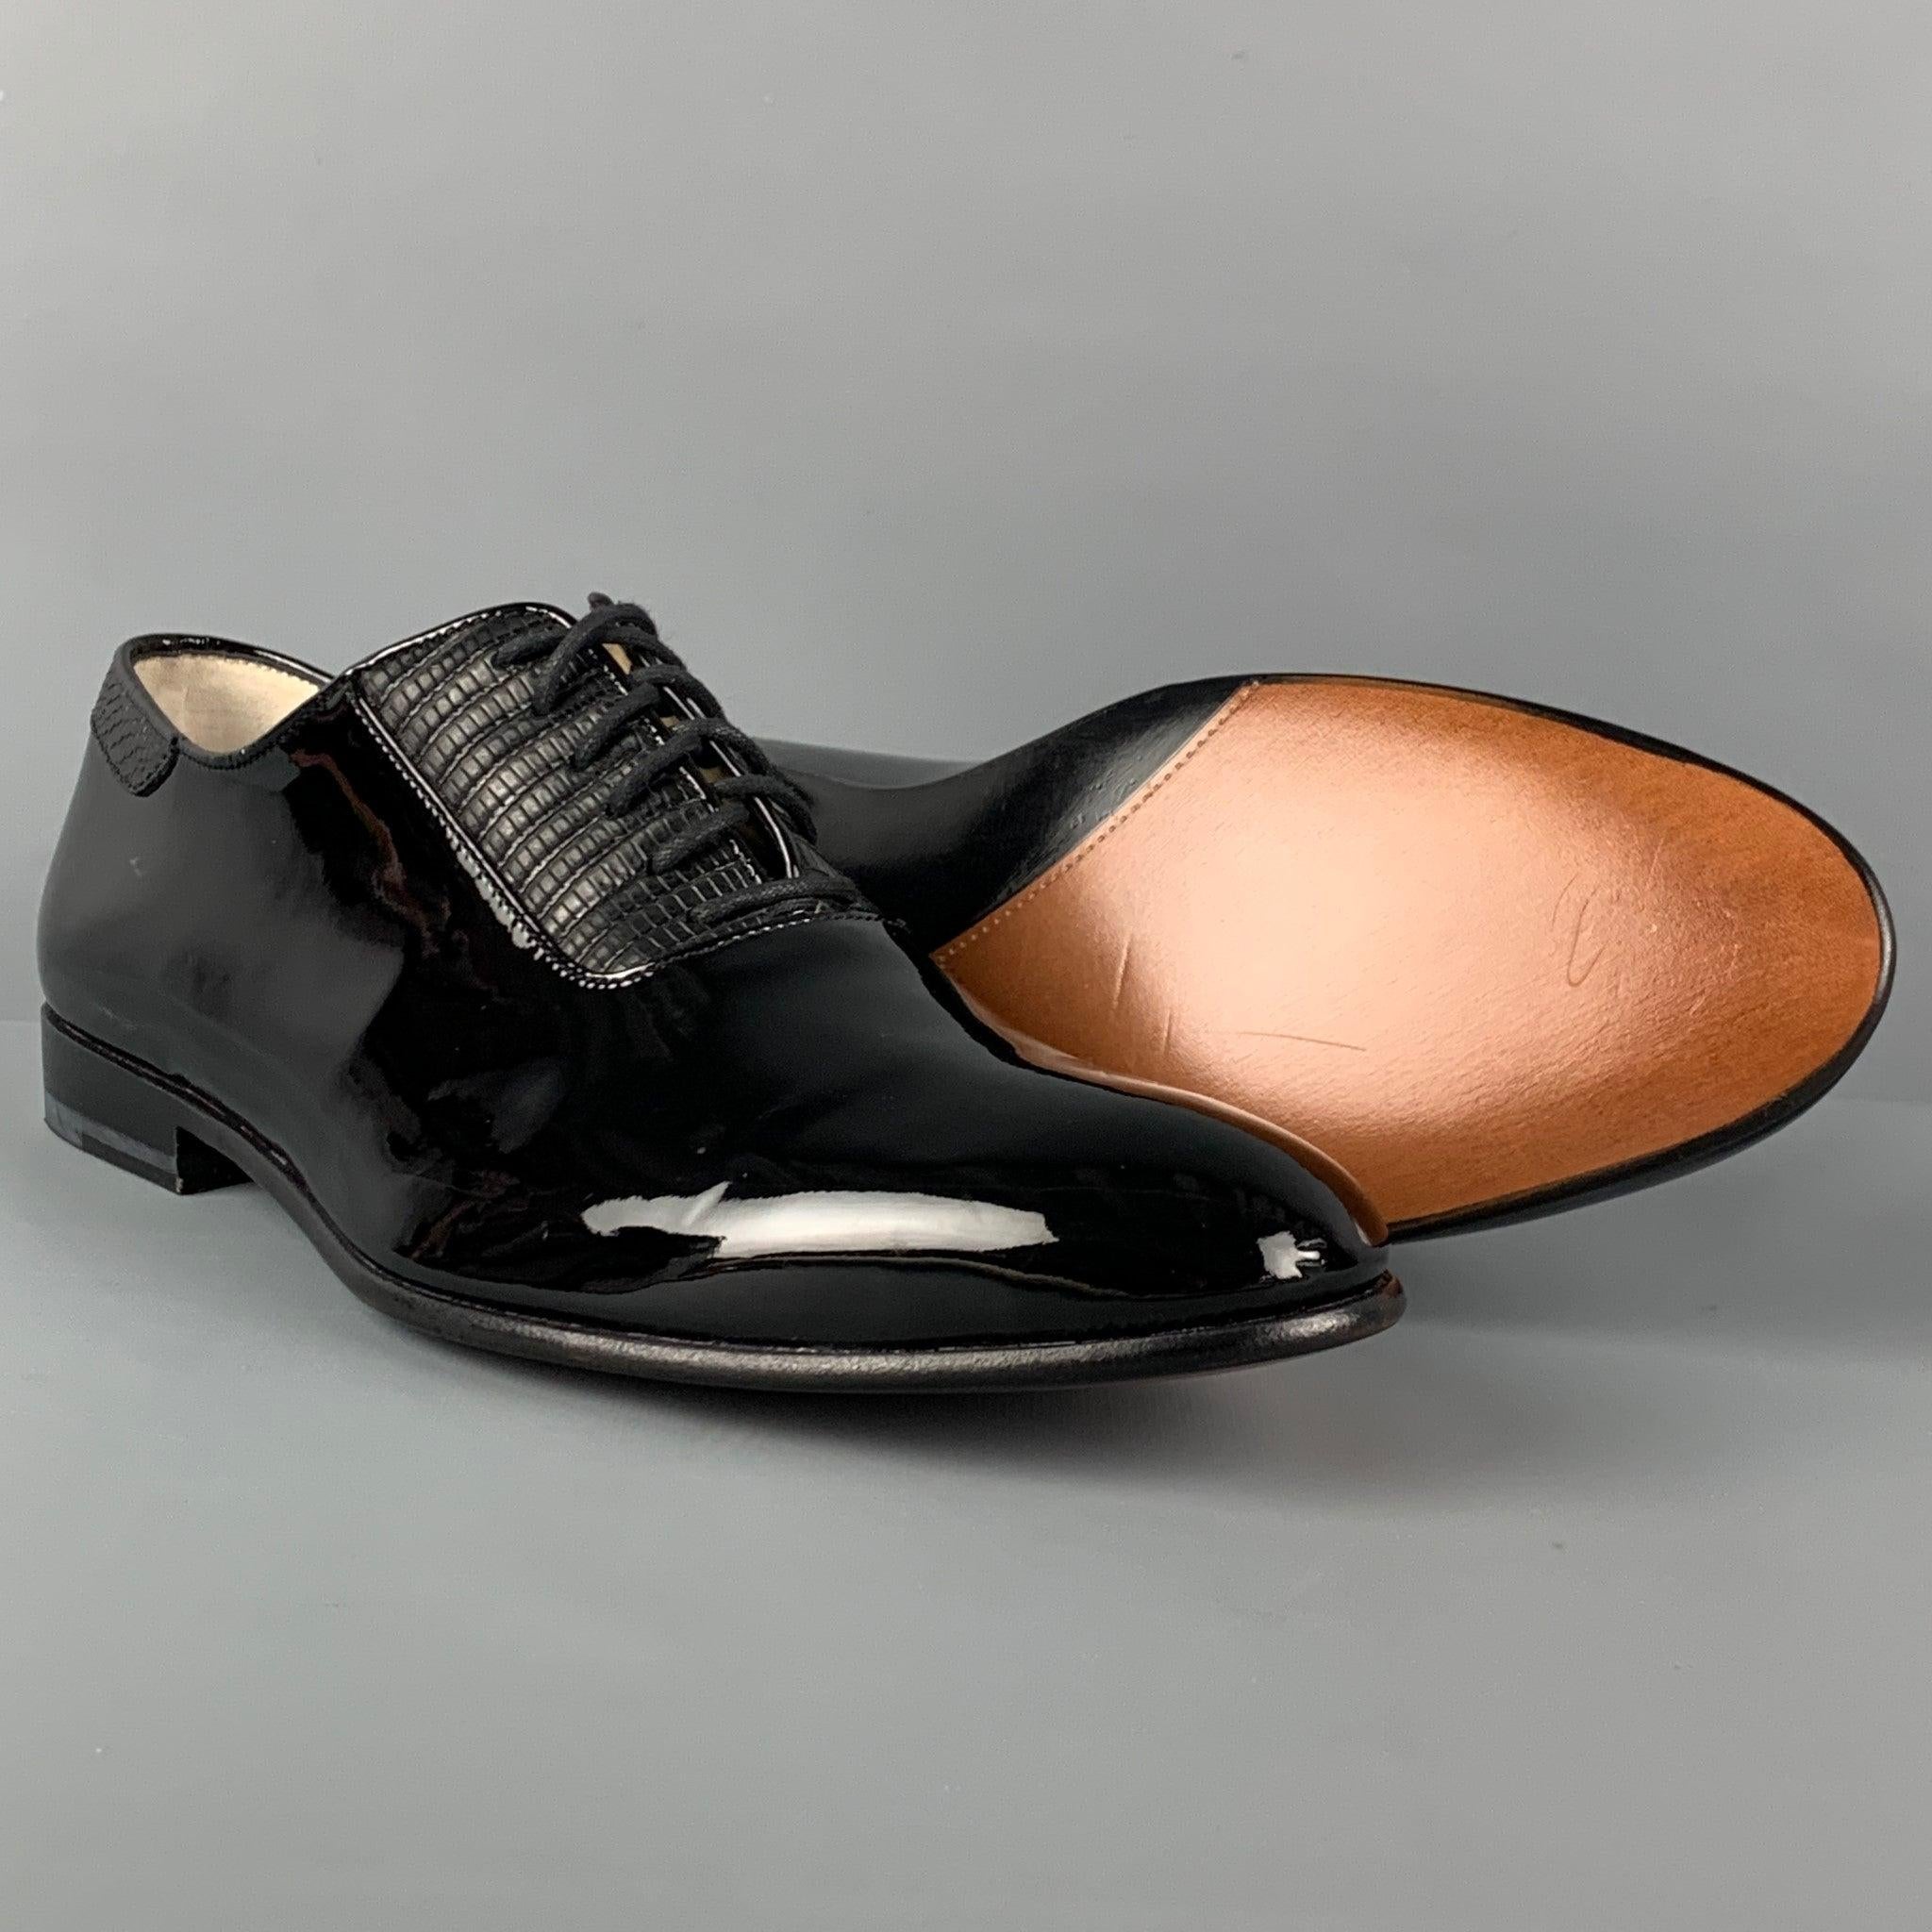 PAUL ANDREW Size 10 Black Leather Lace Up Shoes In Good Condition For Sale In San Francisco, CA